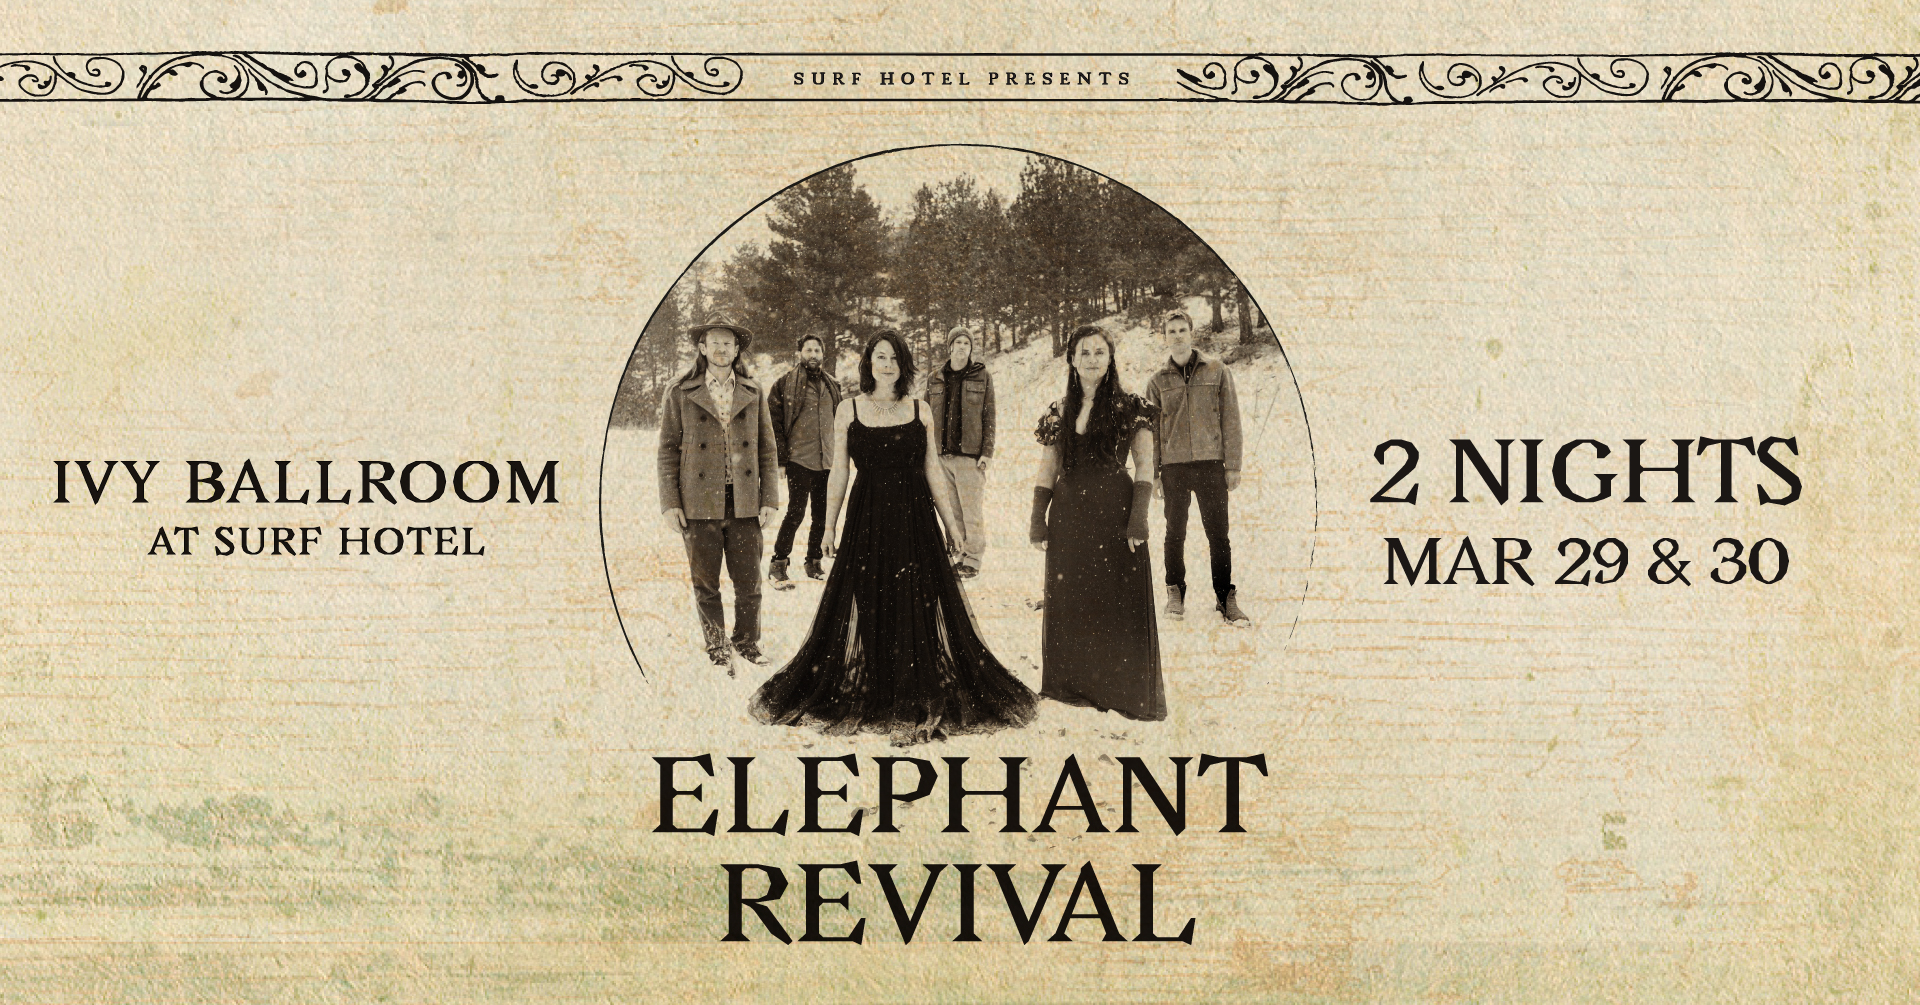 Elephant Revival To Perform in the Ivy Ballroom at Surf Hotel in Buena Vista, Colorado, March 29th & 30th